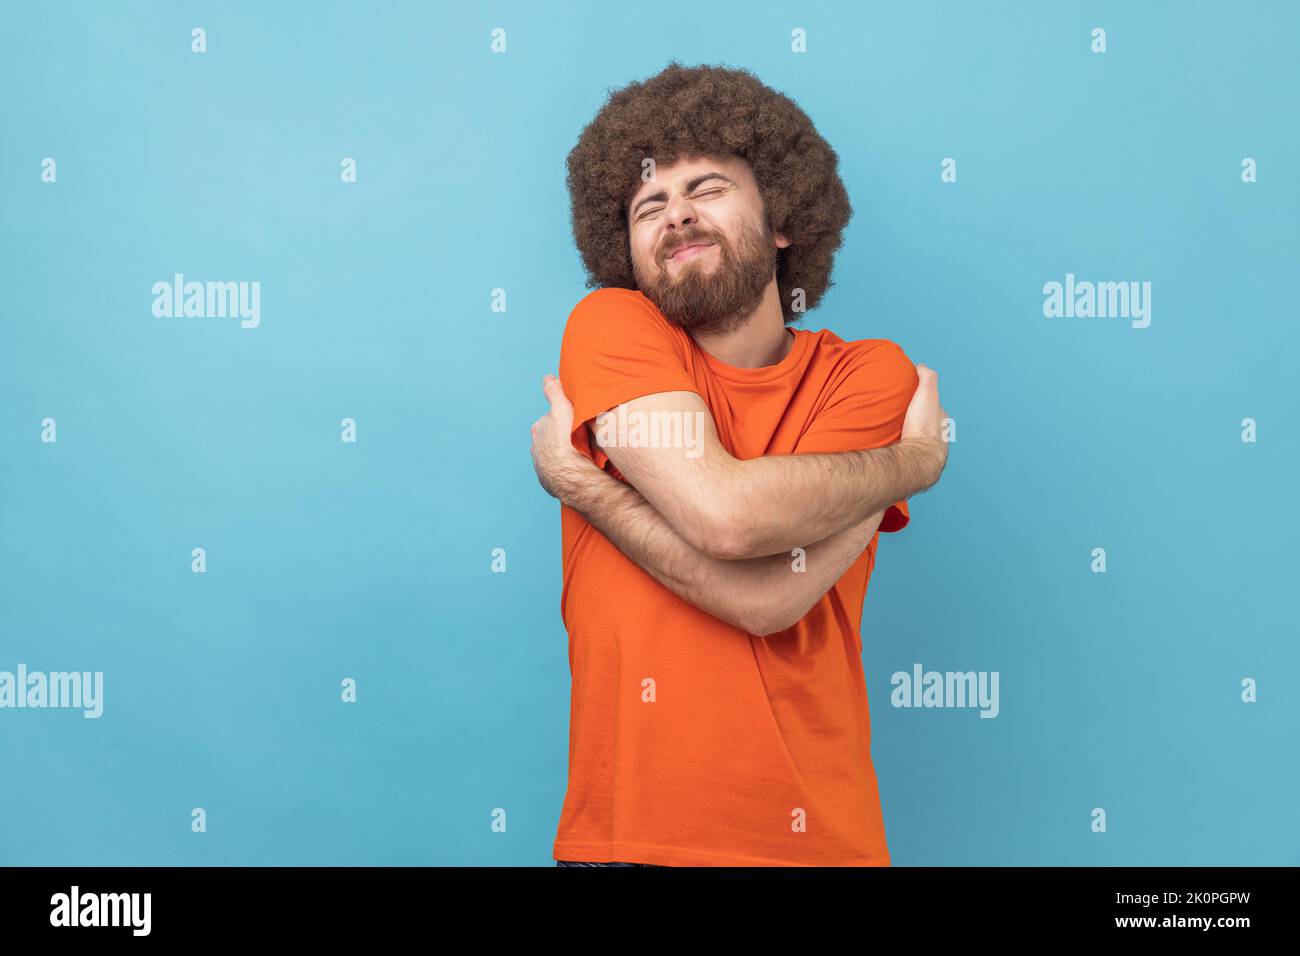 Portrait of selfish narcissistic man with Afro hairstyle embracing himself and smiling with expression of great ego, pleasure and self-esteem. Indoor studio shot isolated on blue background. Stock Photo